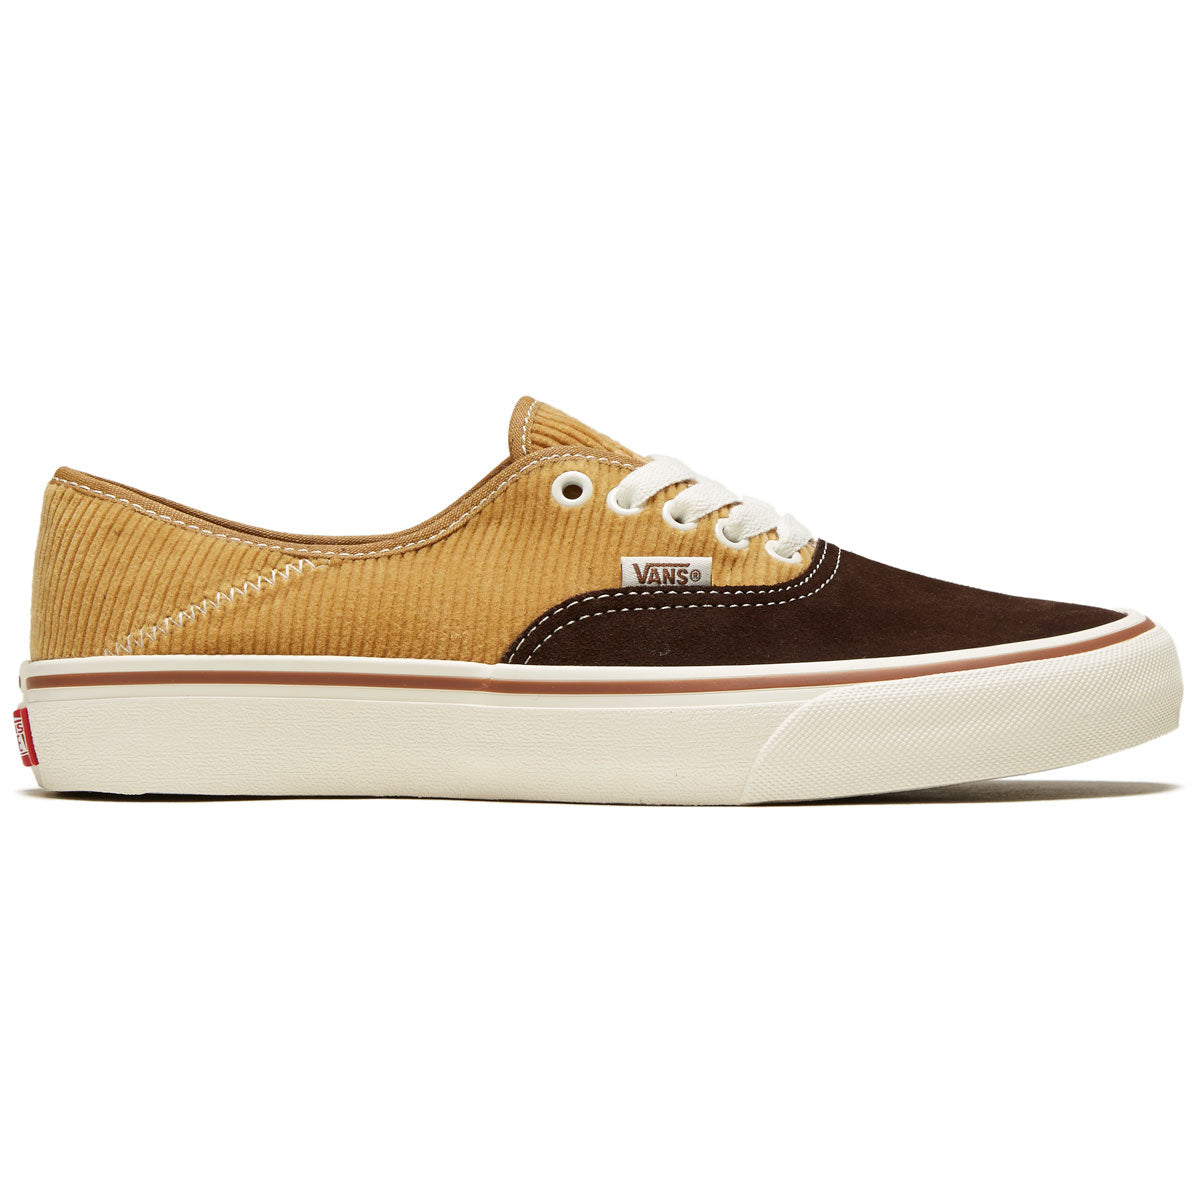 Vans Authentic VR3 Sf Shoes - Mustard Gold image 1